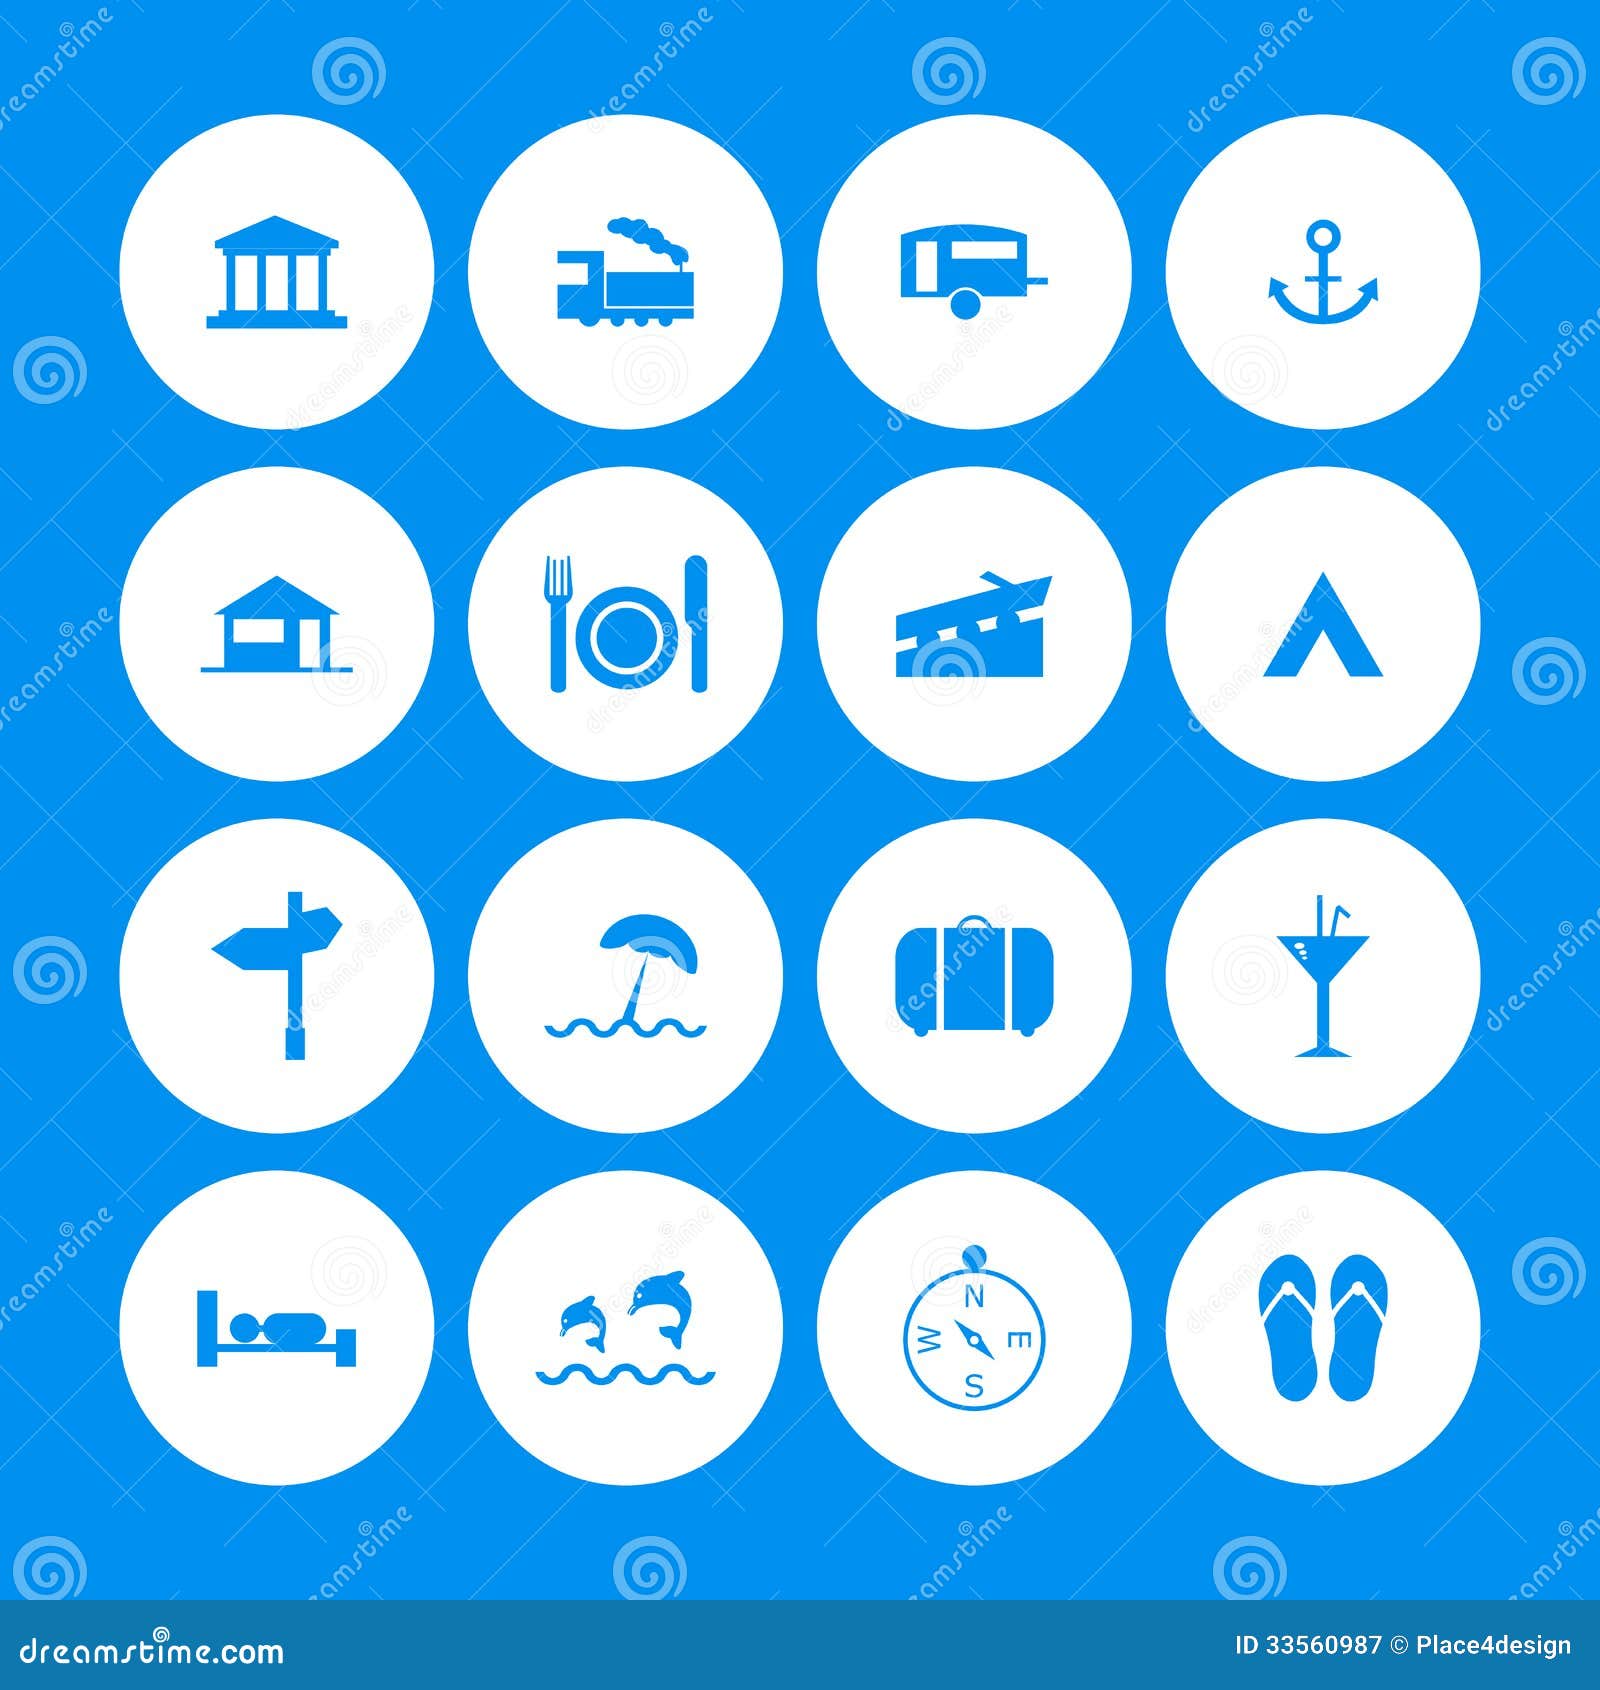 various travel icons royalty free stock photography